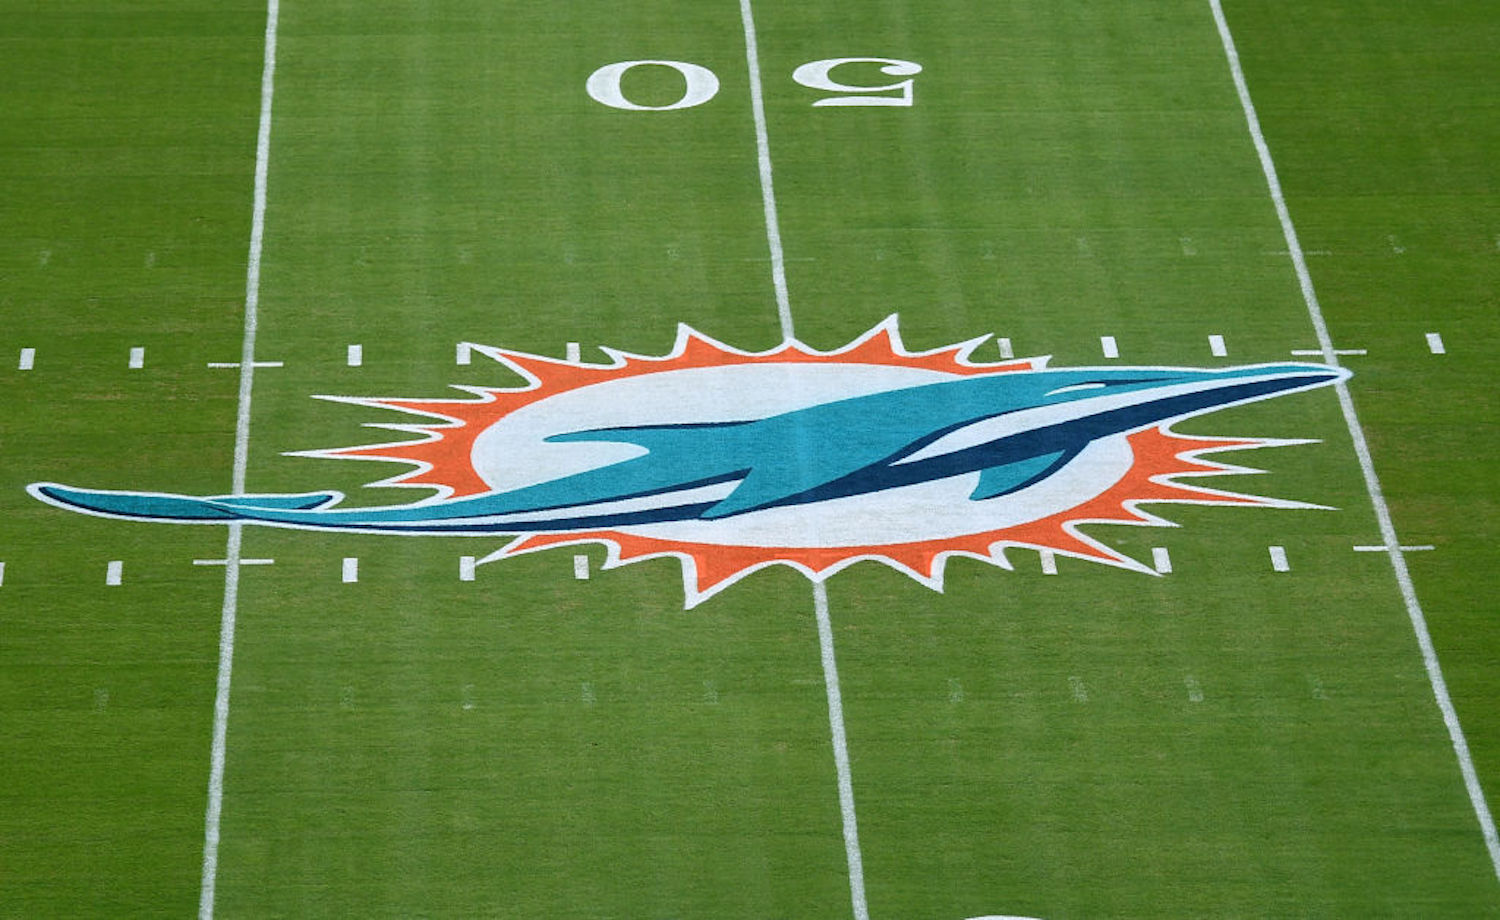 The Miami Dolphins are off to a great start this season, and now the organization is making a historic contribution to cancer research.